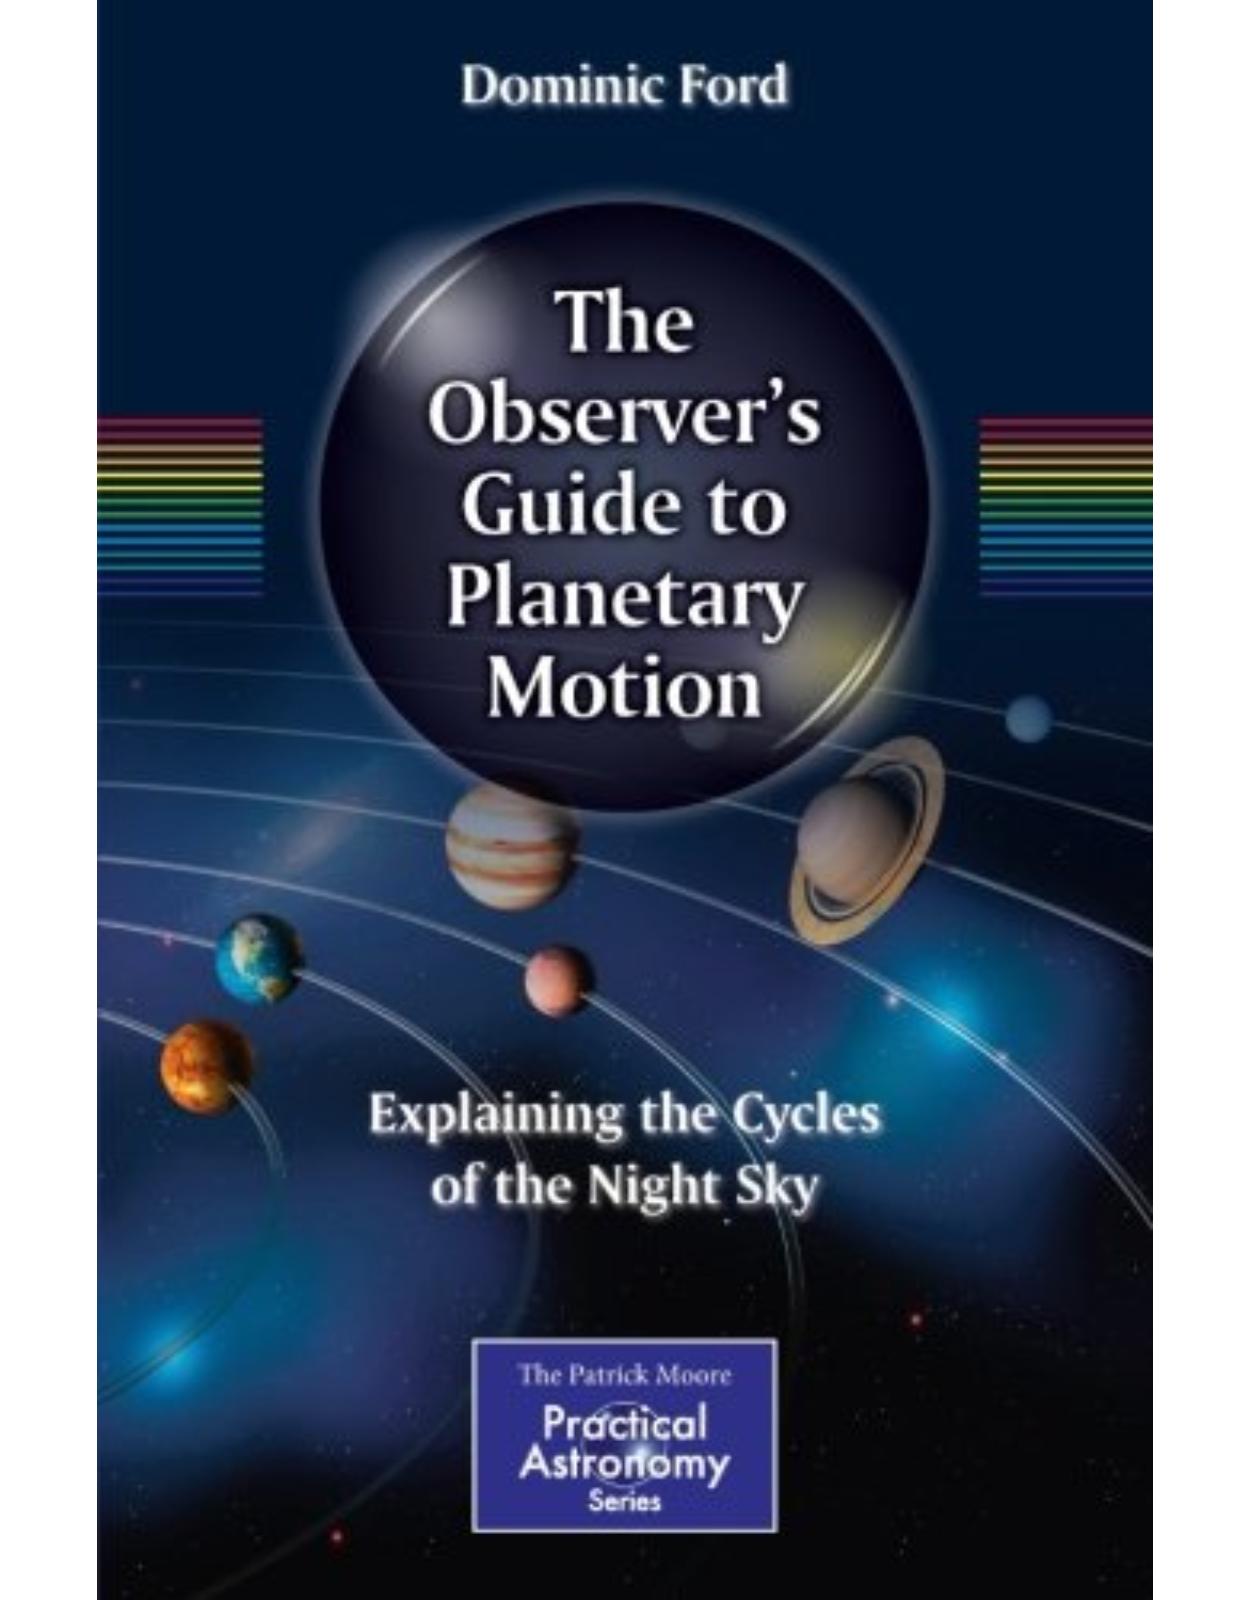 The Observer's Guide to Planetary Motion